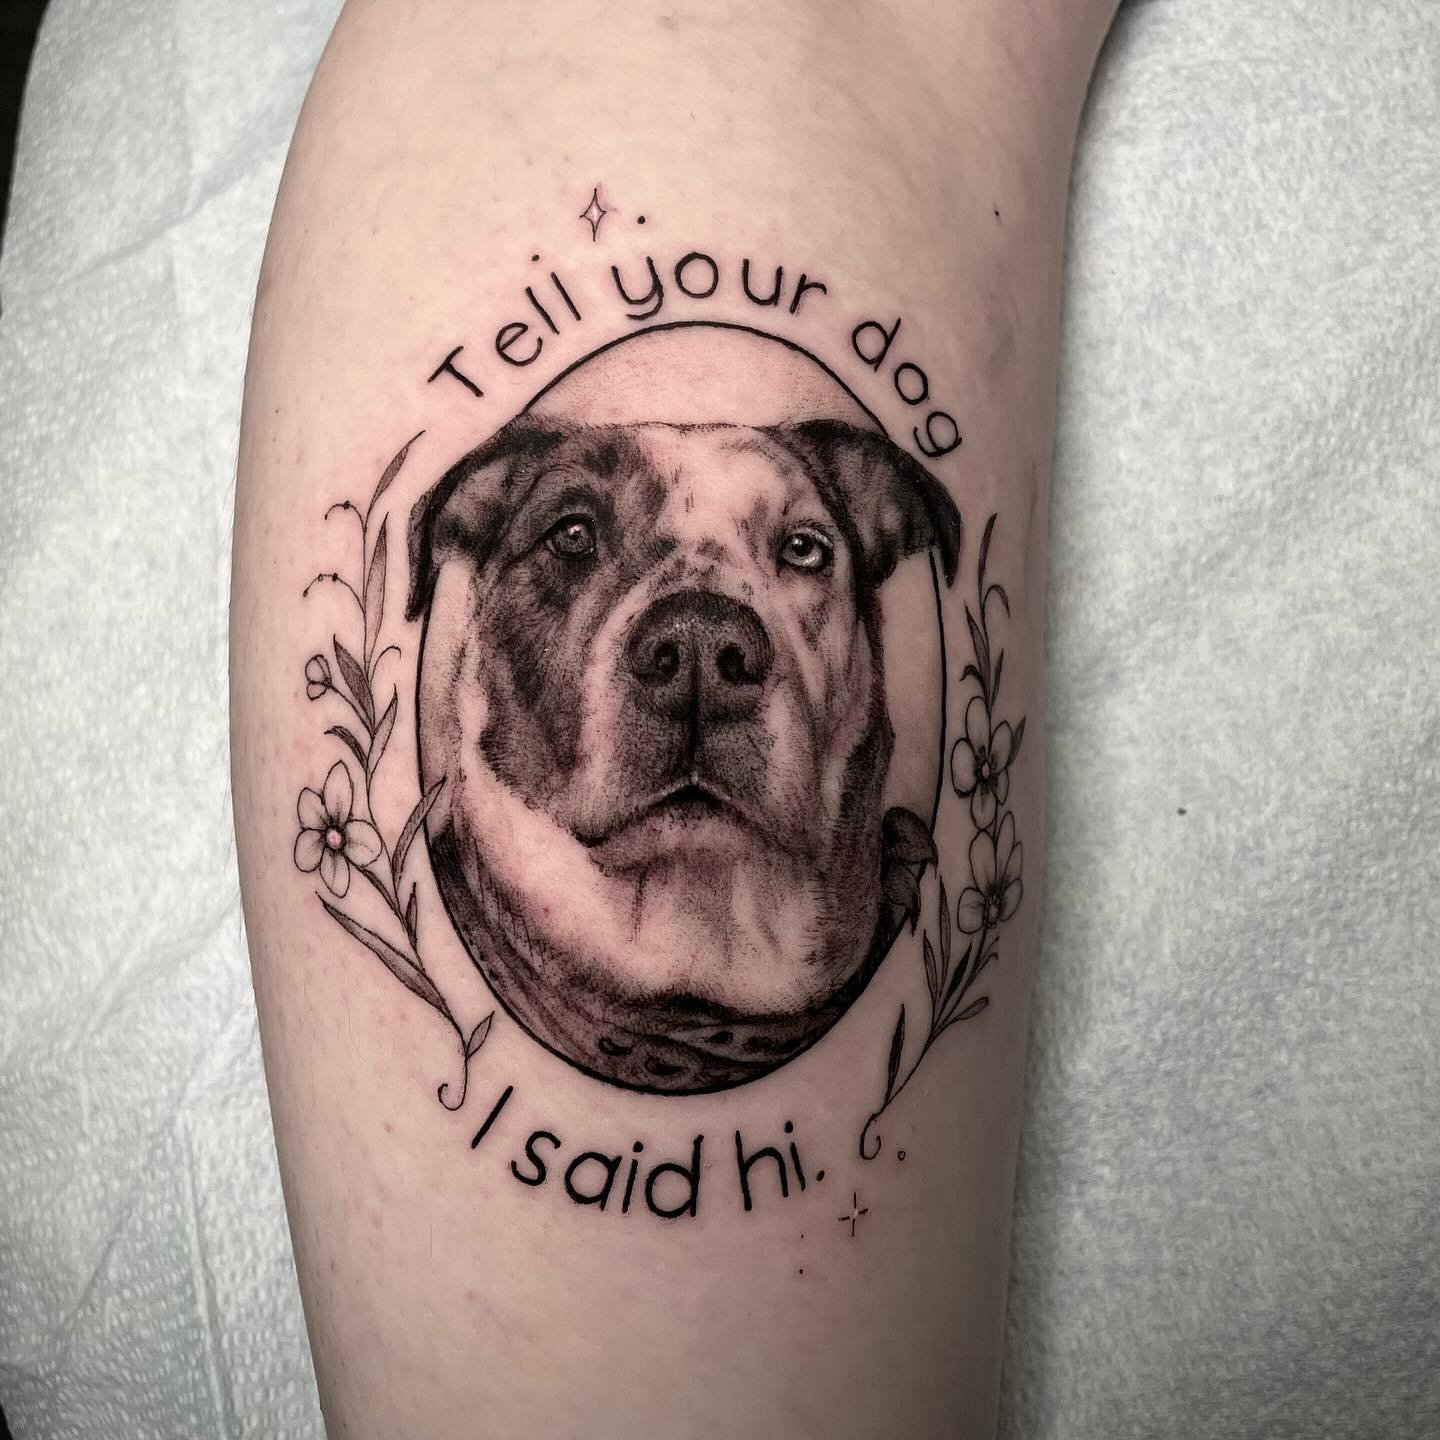 This is my sister&rsquo;s dog, Loki. (Swipe for photo of them). I tattoo a lot of people&rsquo;s pets, some still alive, some that have passed. Sometimes when I&rsquo;m finished, my clients get emotional. It&rsquo;s such a priveledge to move people w